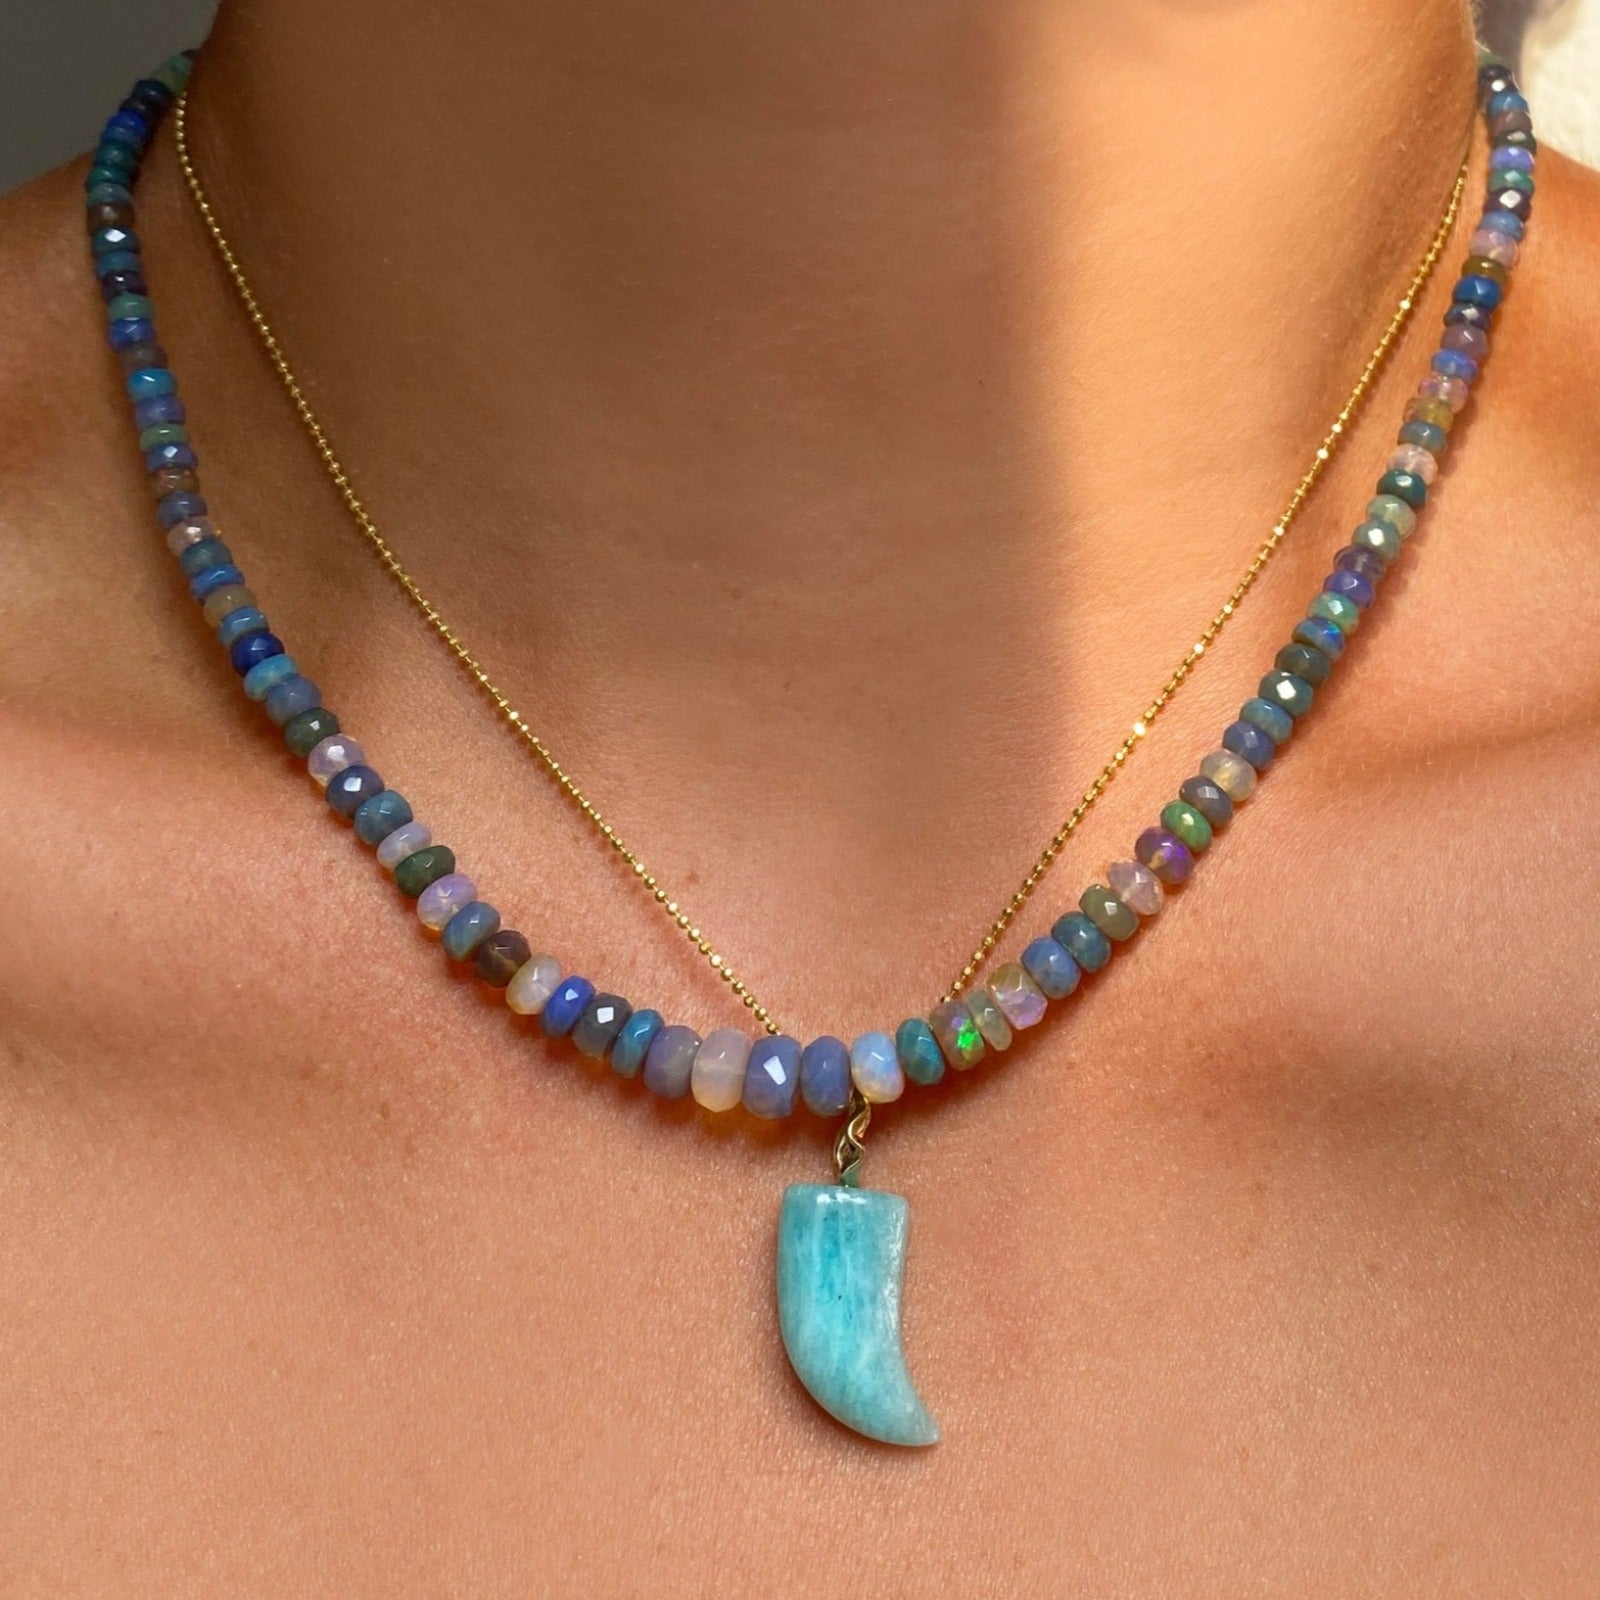 Amazonite horn charm. Styled on a neck hanging from a diamond cut bead chain necklace.